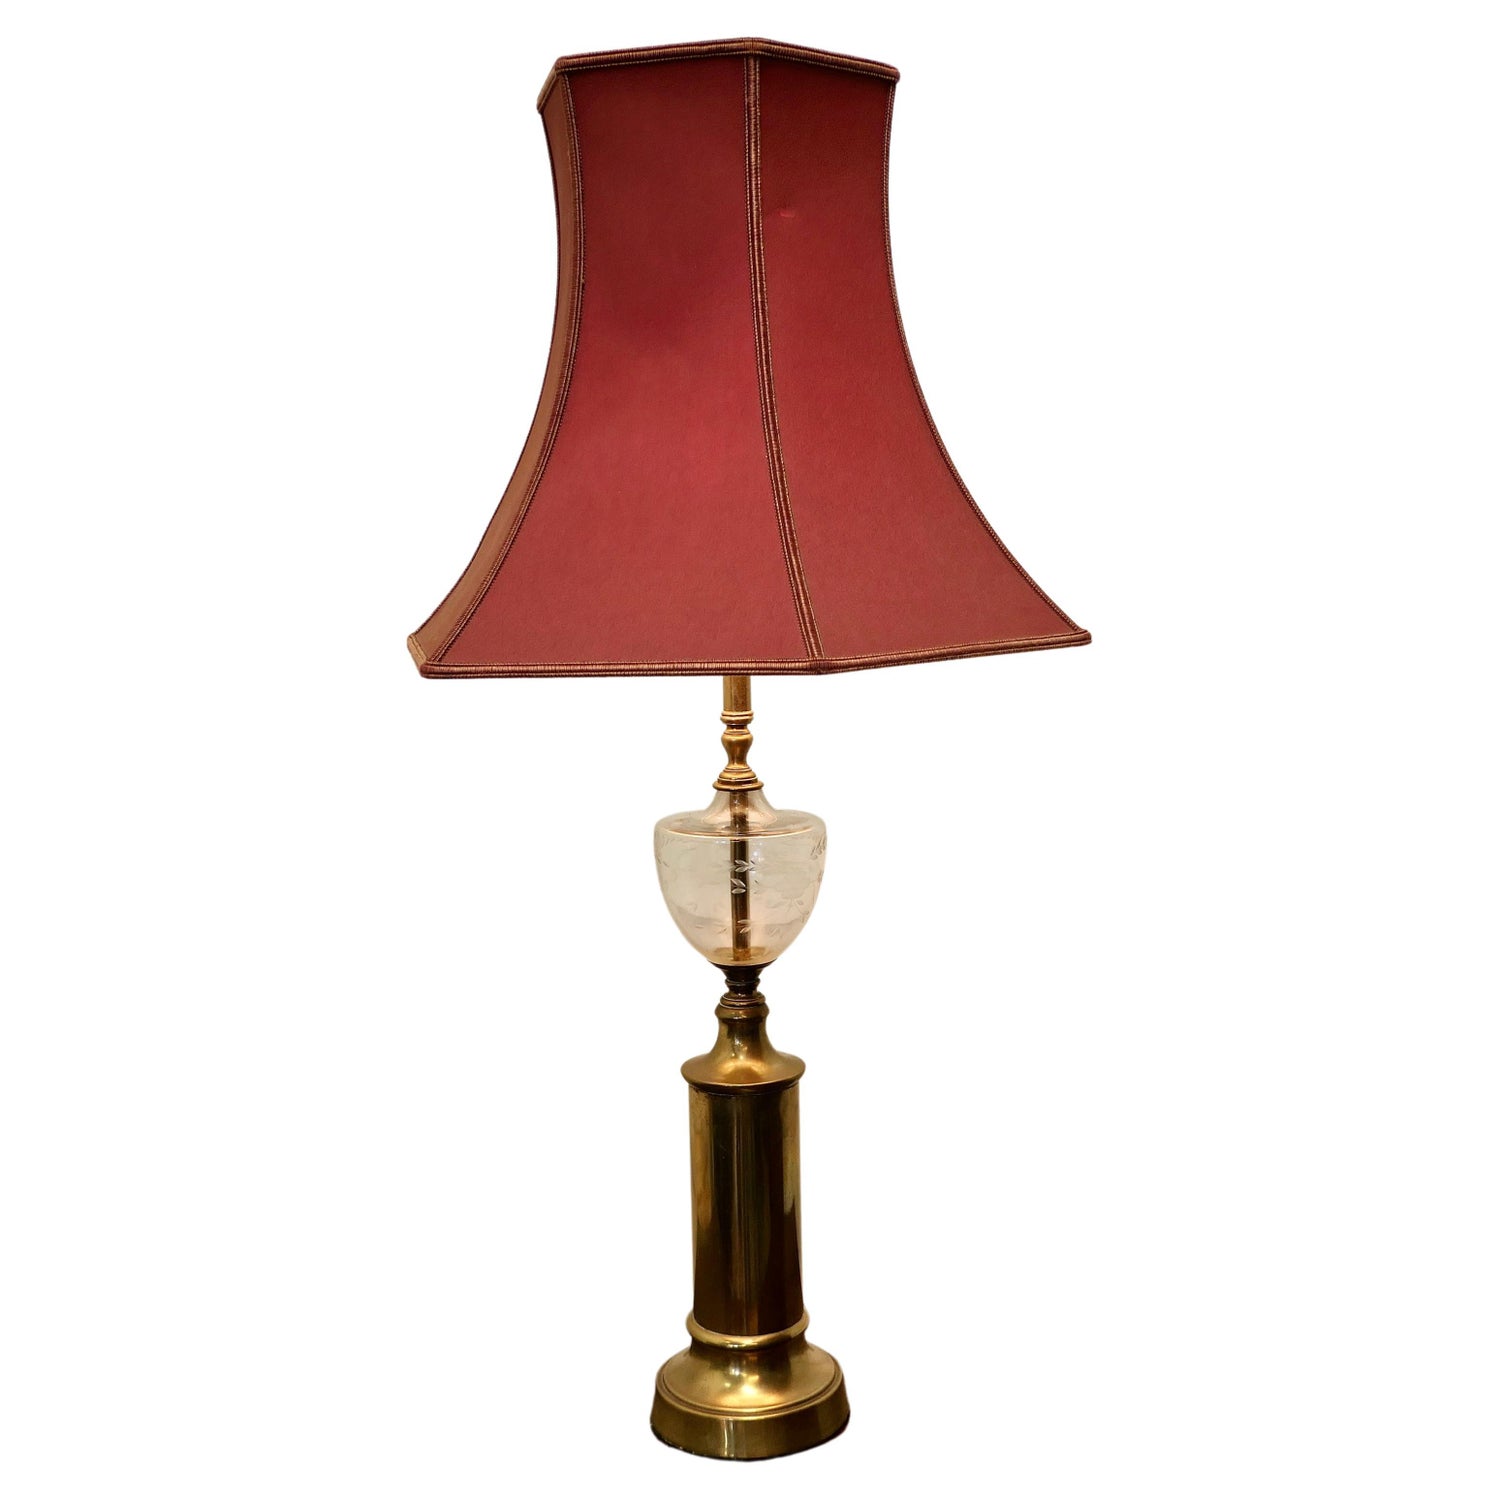 Vintage table lamp brass fabric shade red - Flodhest Abe